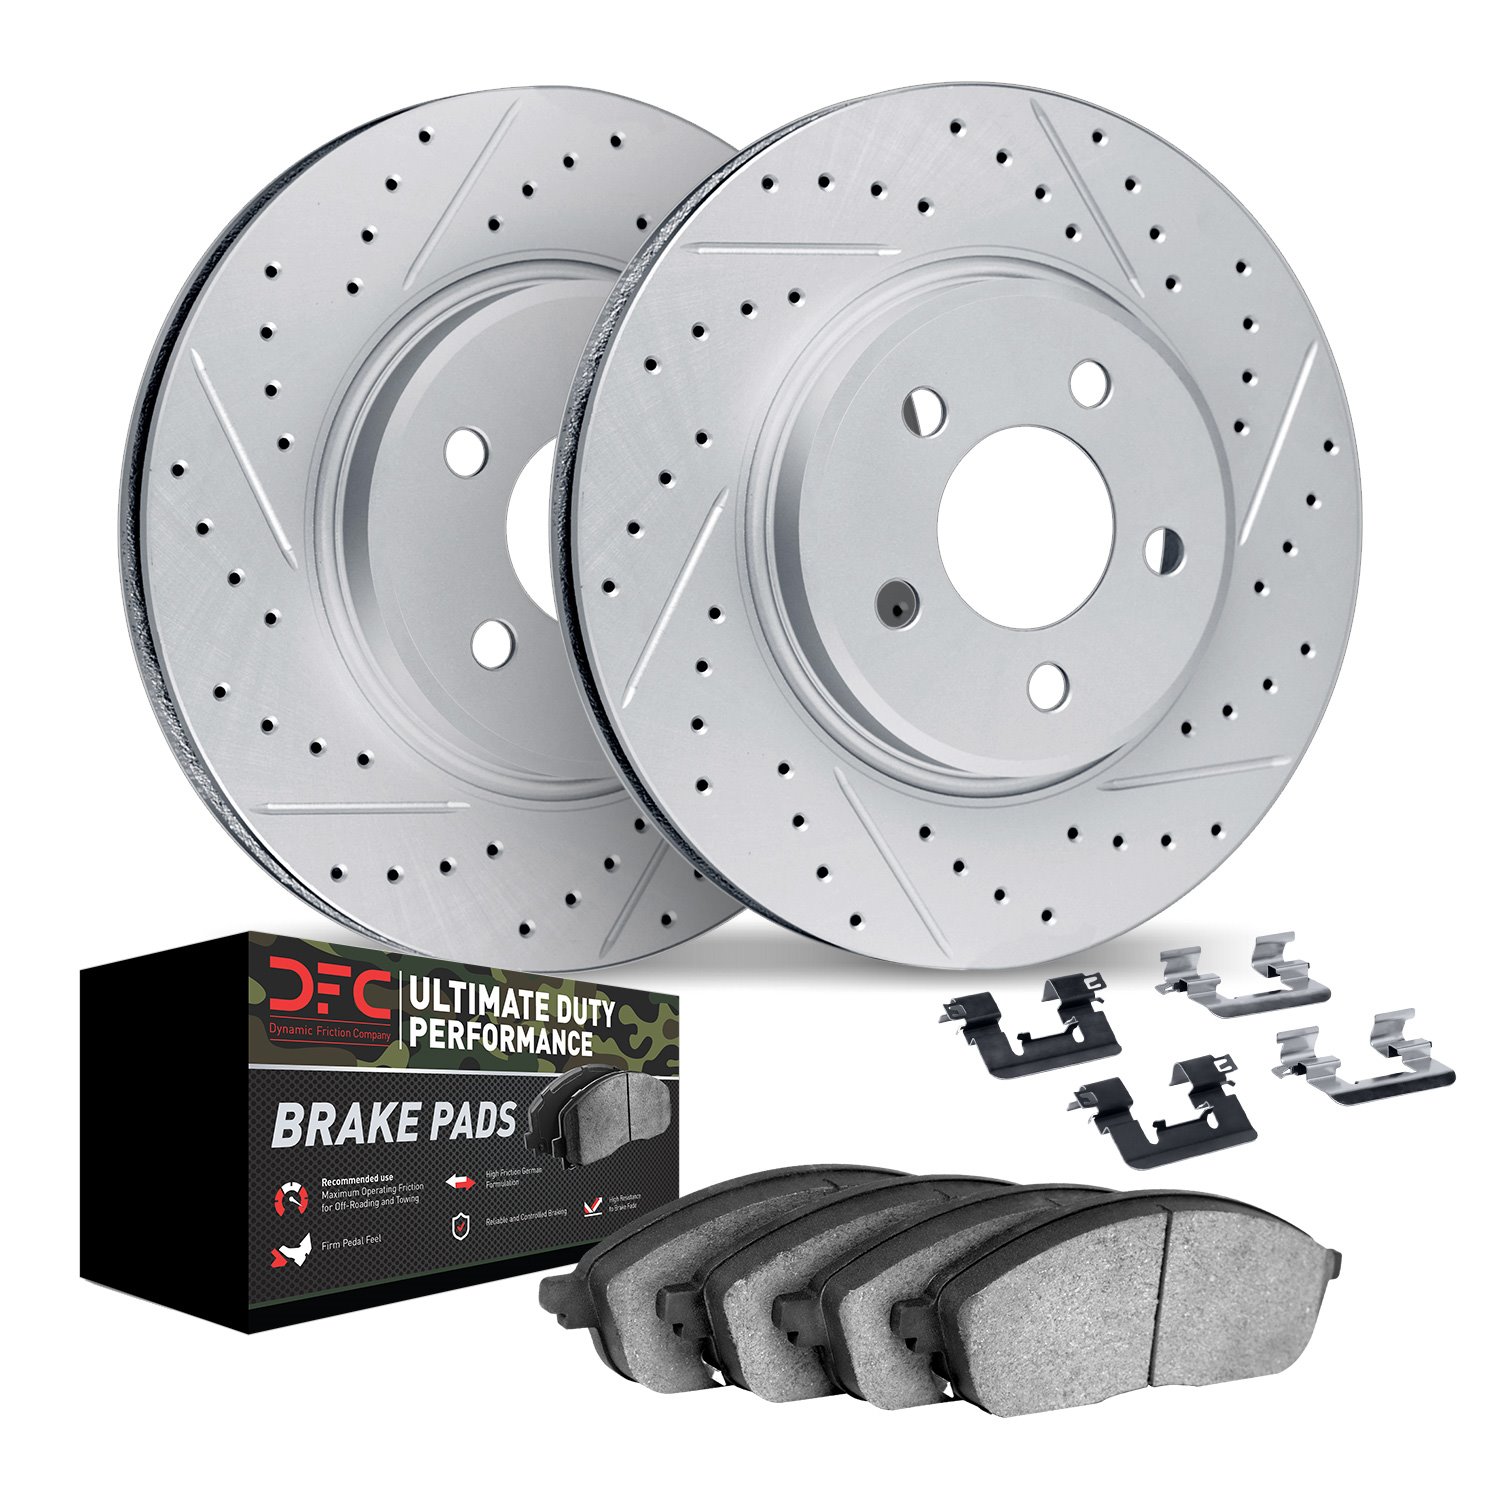 2412-54032 Geoperformance Drilled/Slotted Brake Rotors with Ultimate-Duty Brake Pads Kit & Hardware, 1999-2004 Ford/Lincoln/Merc